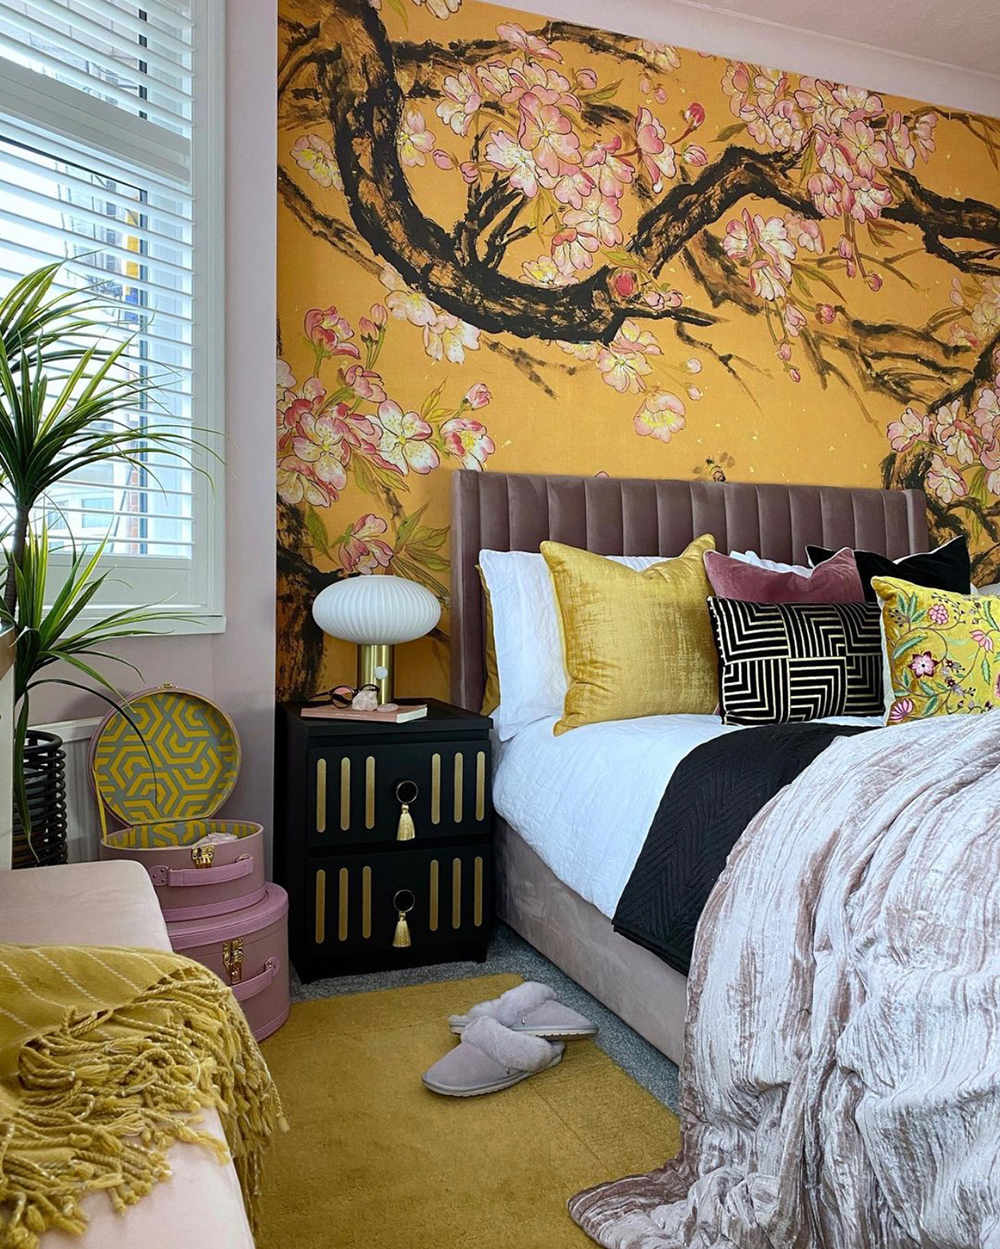 Bedroom decor inspiration with bold feature wall of yellow patterned wallpaper by Jo at Cloud Nine Interiors